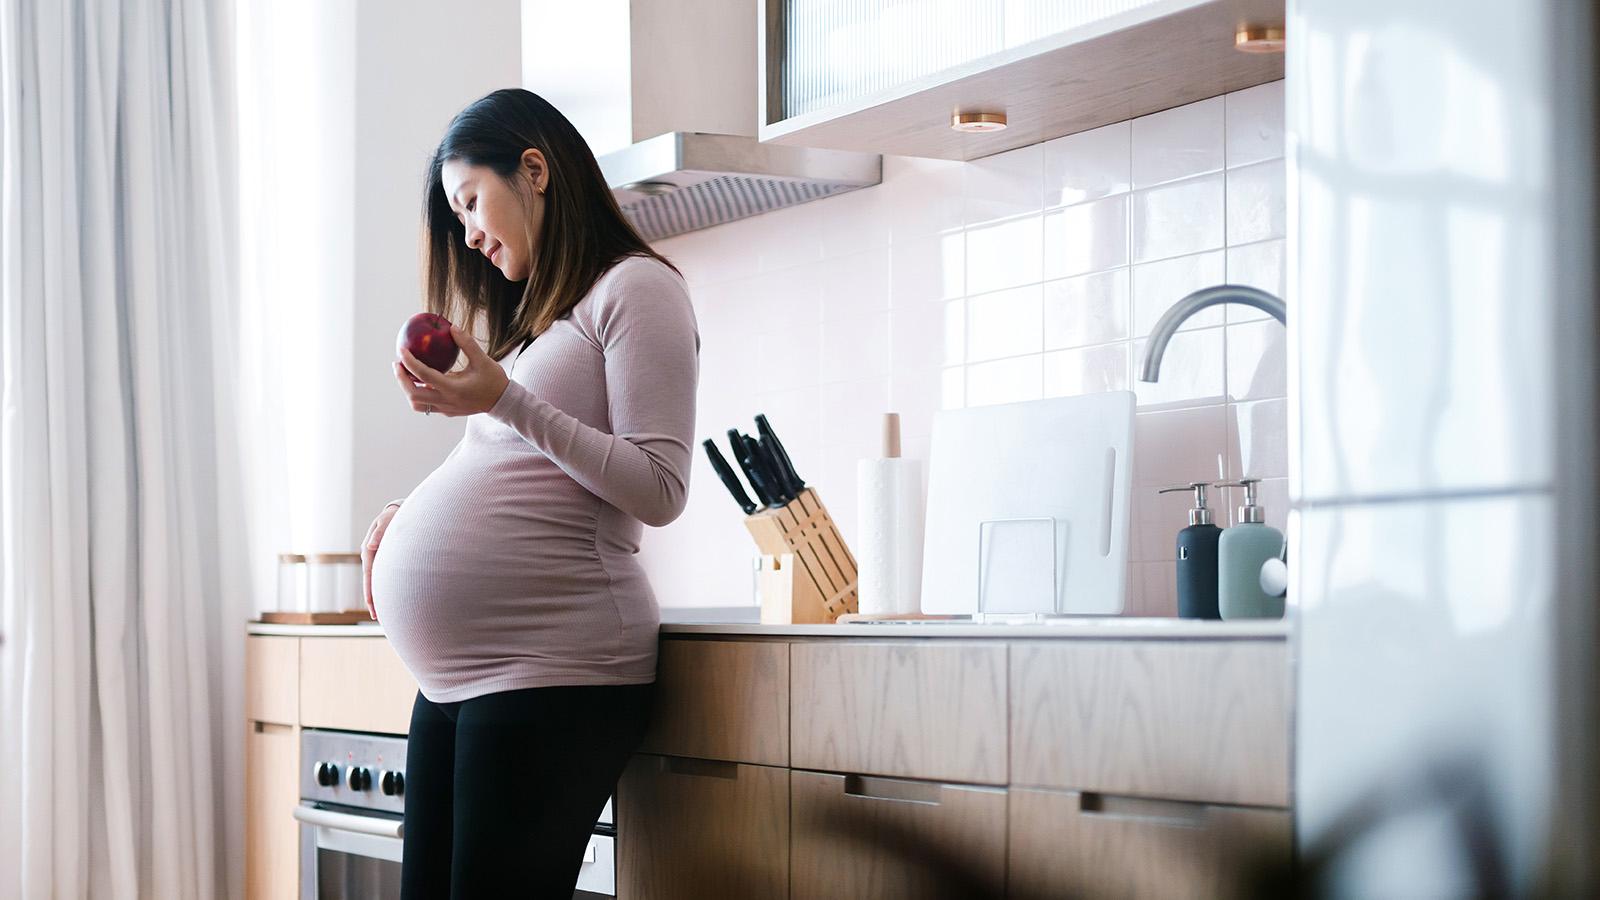 Pregnant woman standing by kitchen